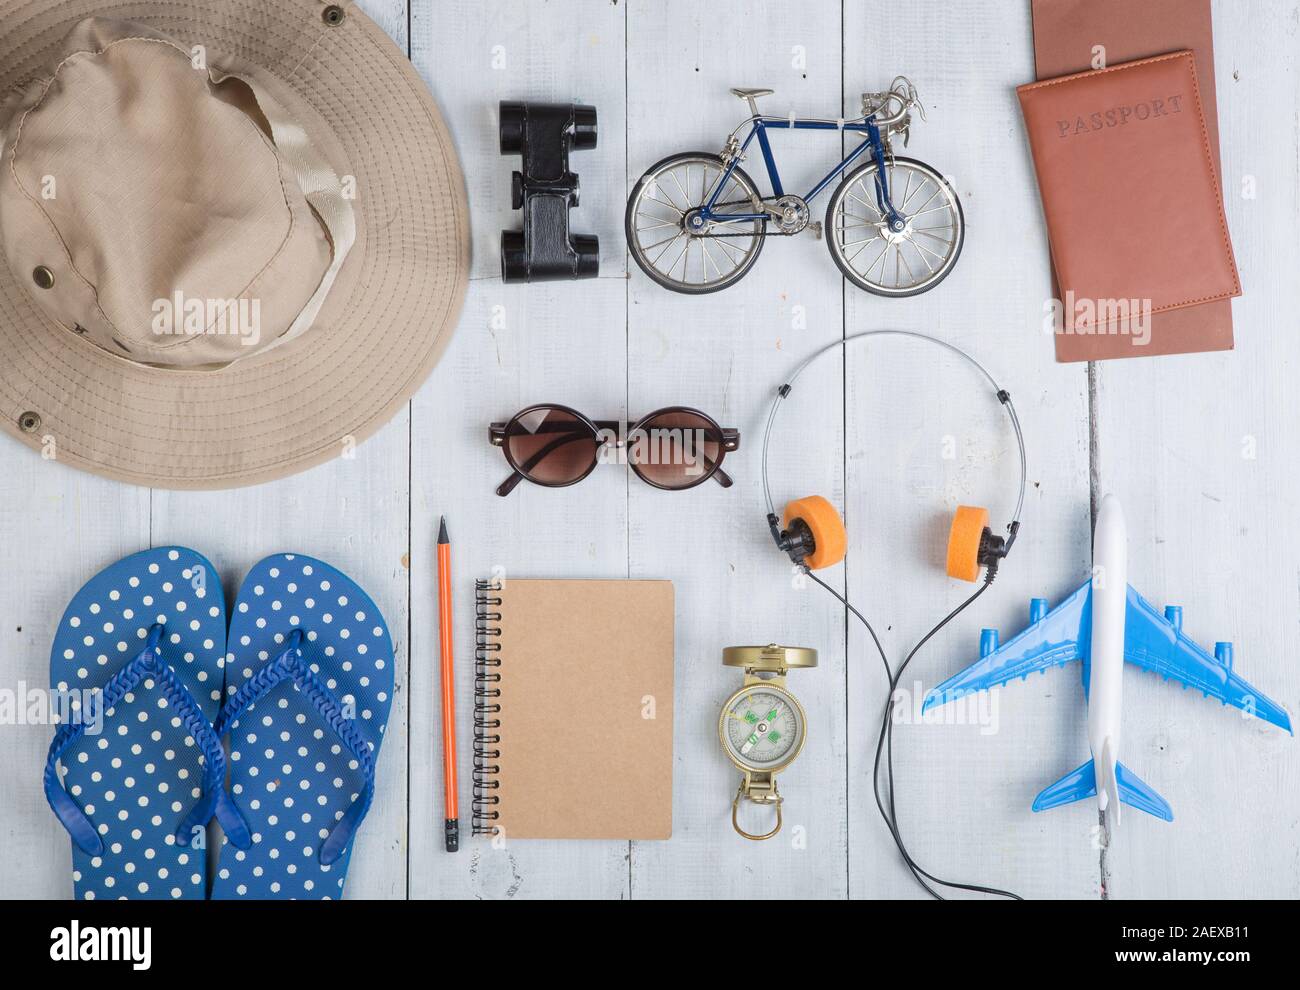 Prepare for journey - accessories and travel items, packing clothes: hat, passport, tickets, model of airplane and bicycle, flip flops, sunglasses, co Stock Photo